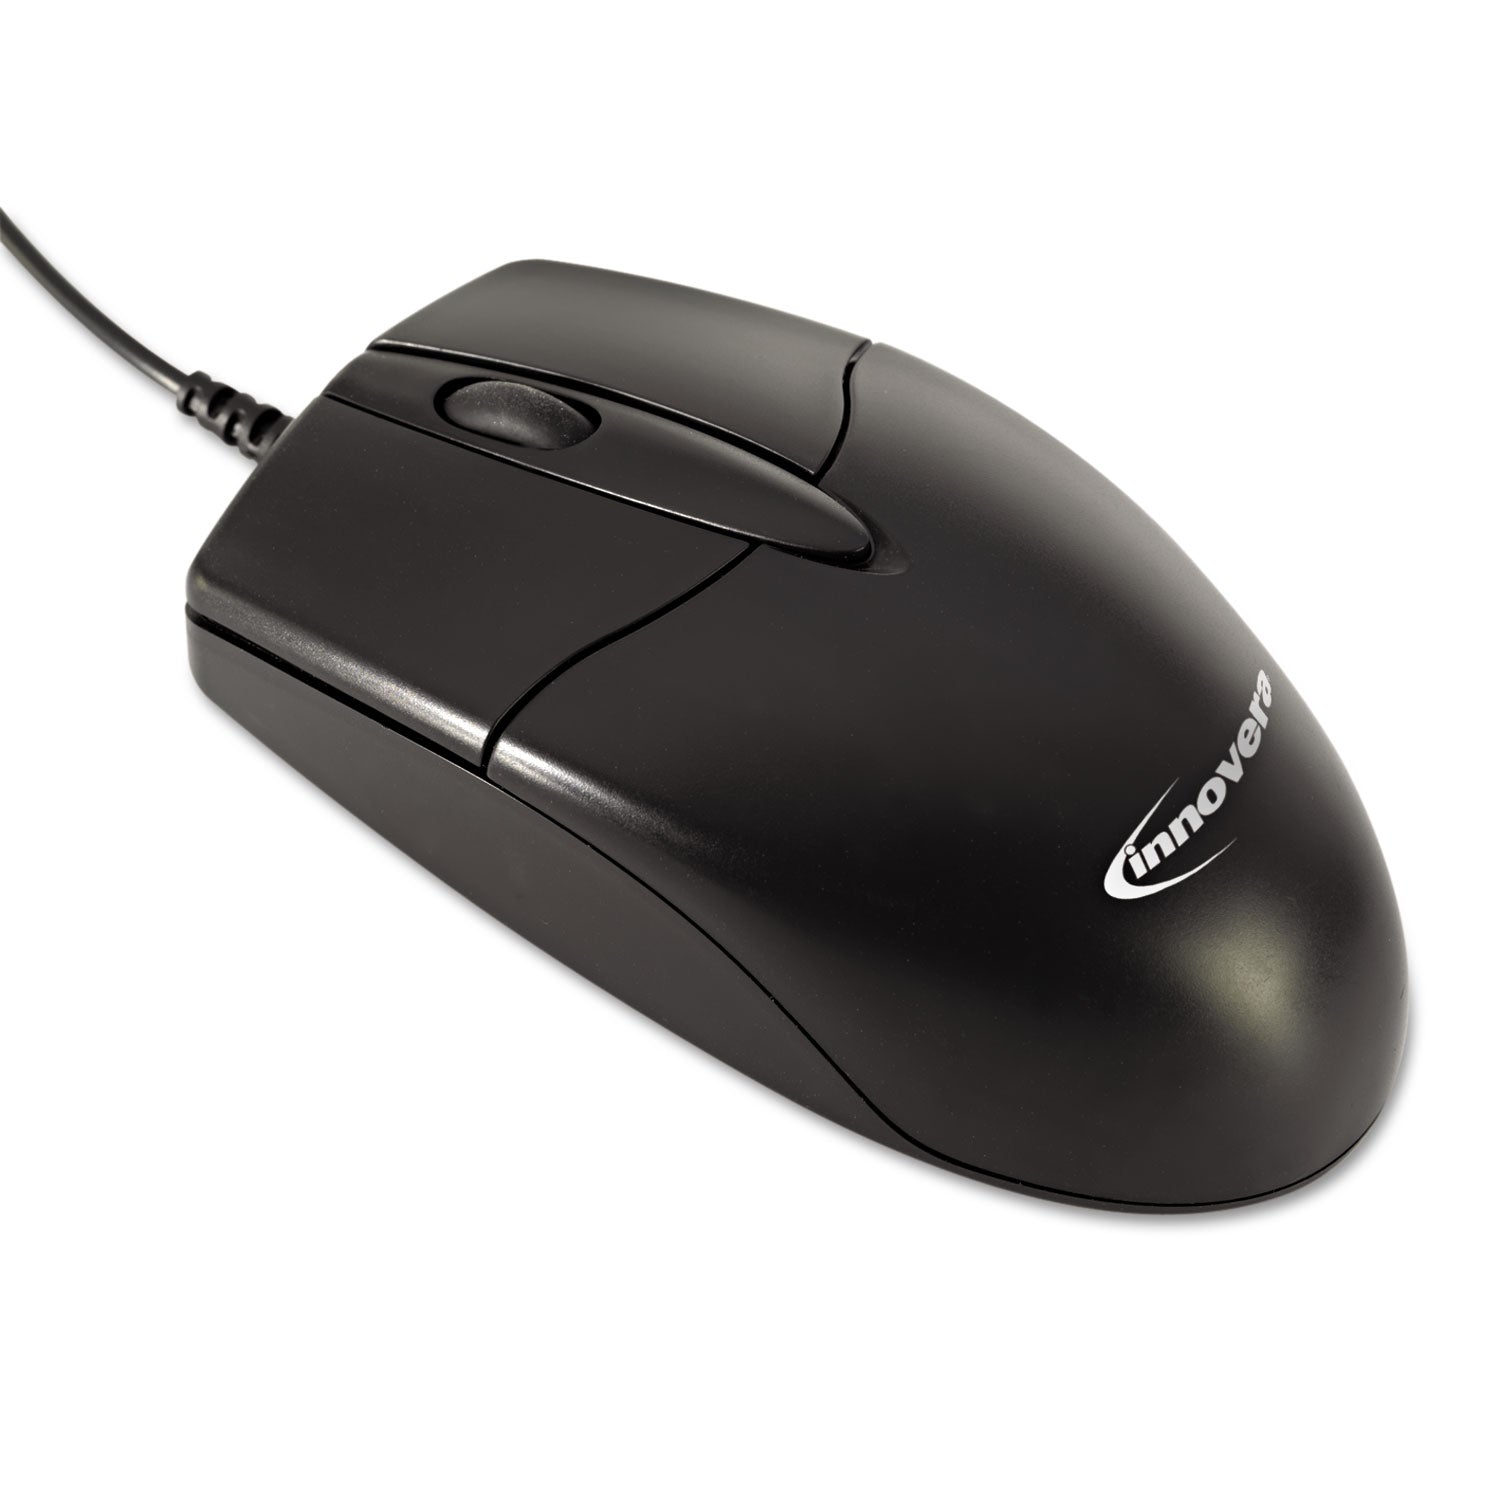 Mid-Size Optical Mouse, USB 2.0, Left/Right Hand Use, Black - 